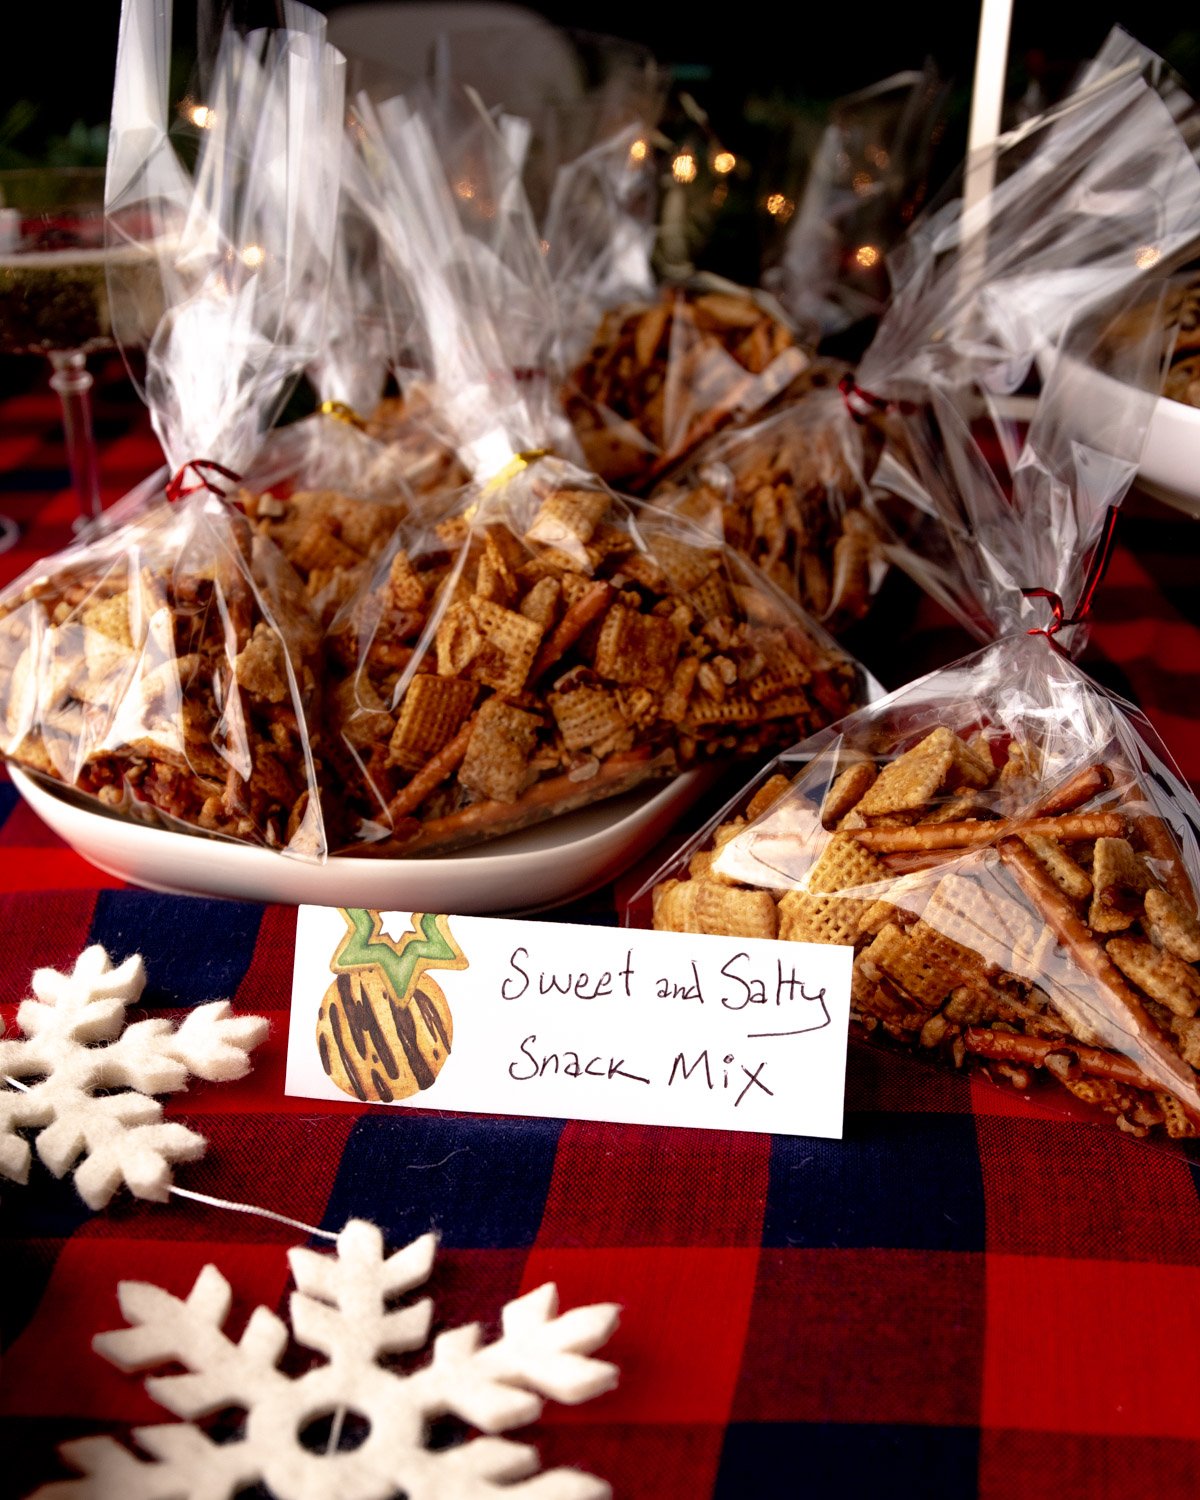 snack mix in small bags on a white plate with a label